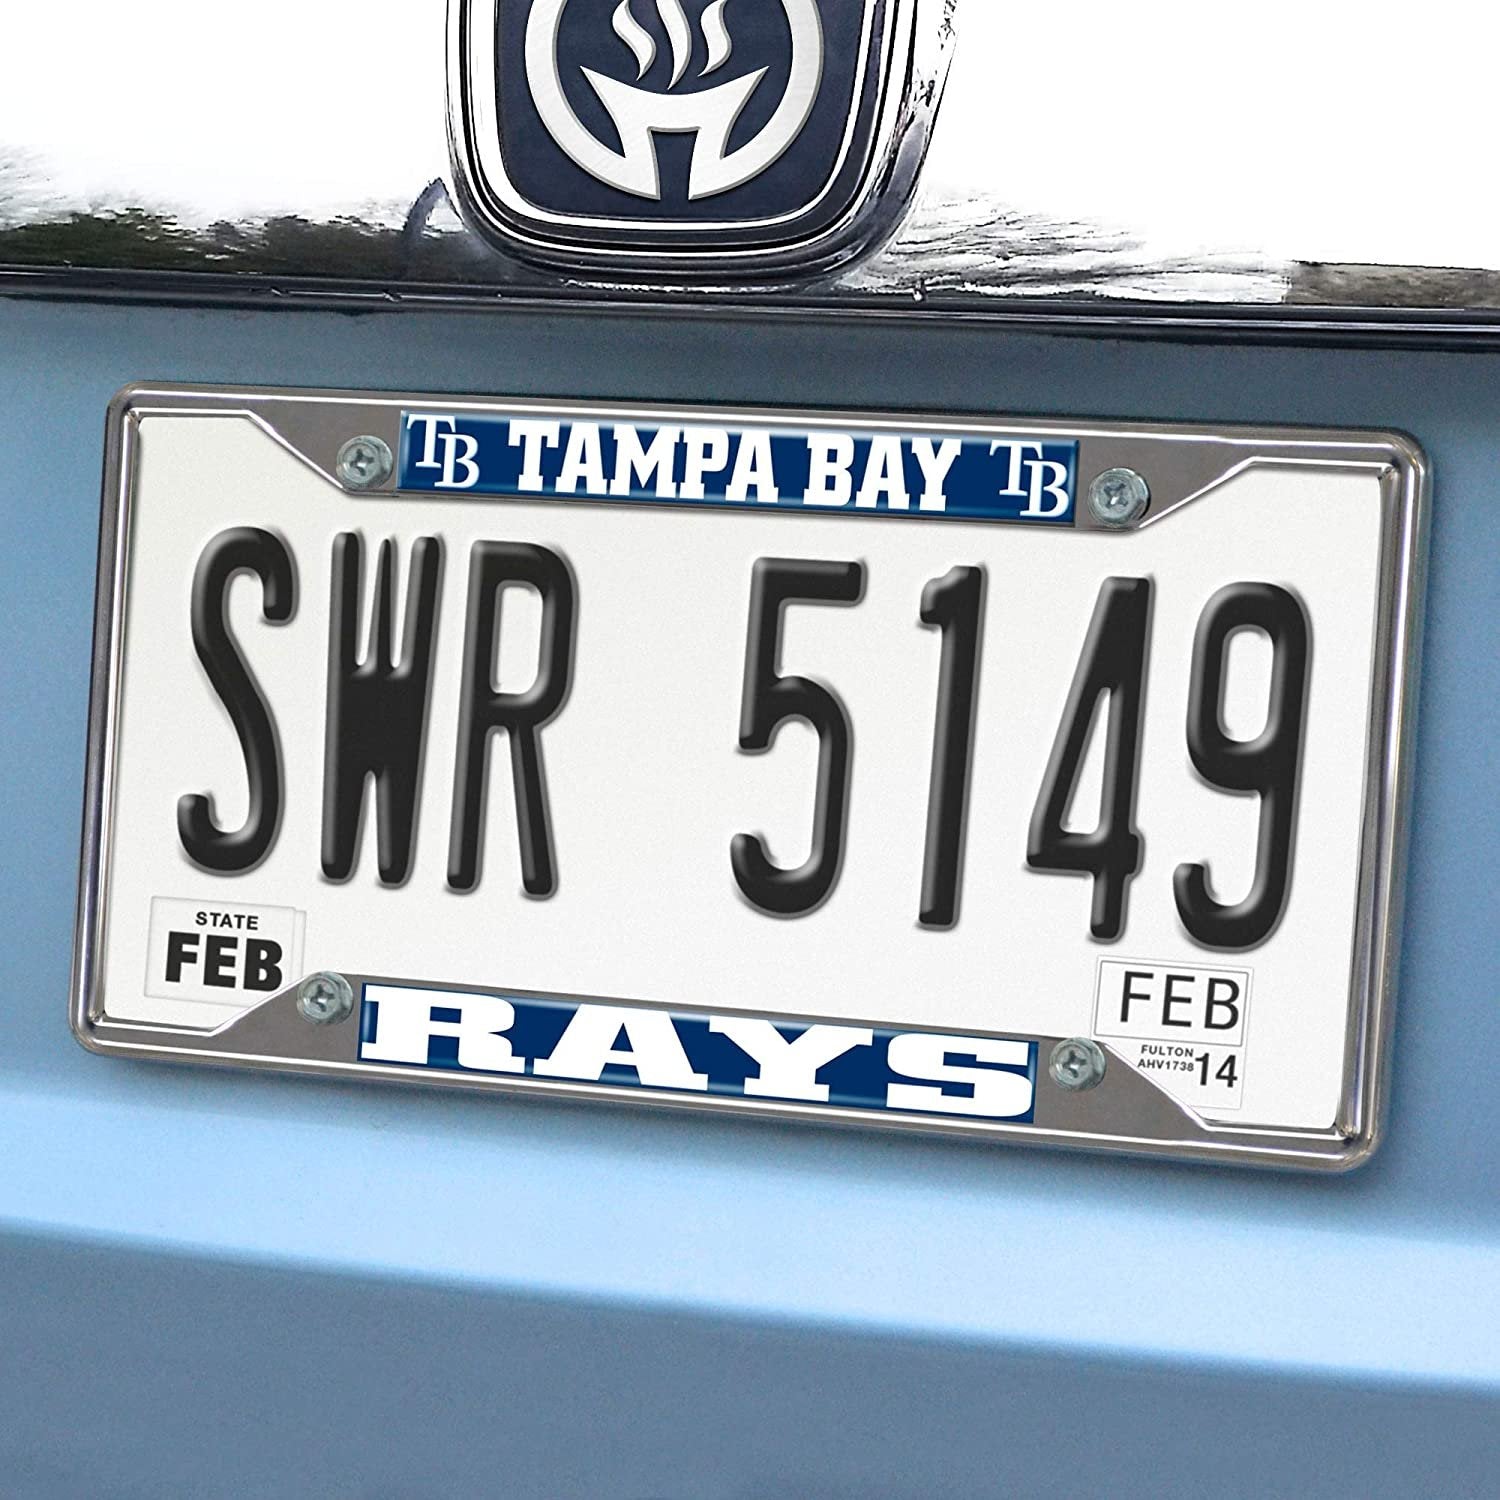 Tampa Bay Rays Metal License Plate Frame Tag Cover Chrome 6x12 Inch